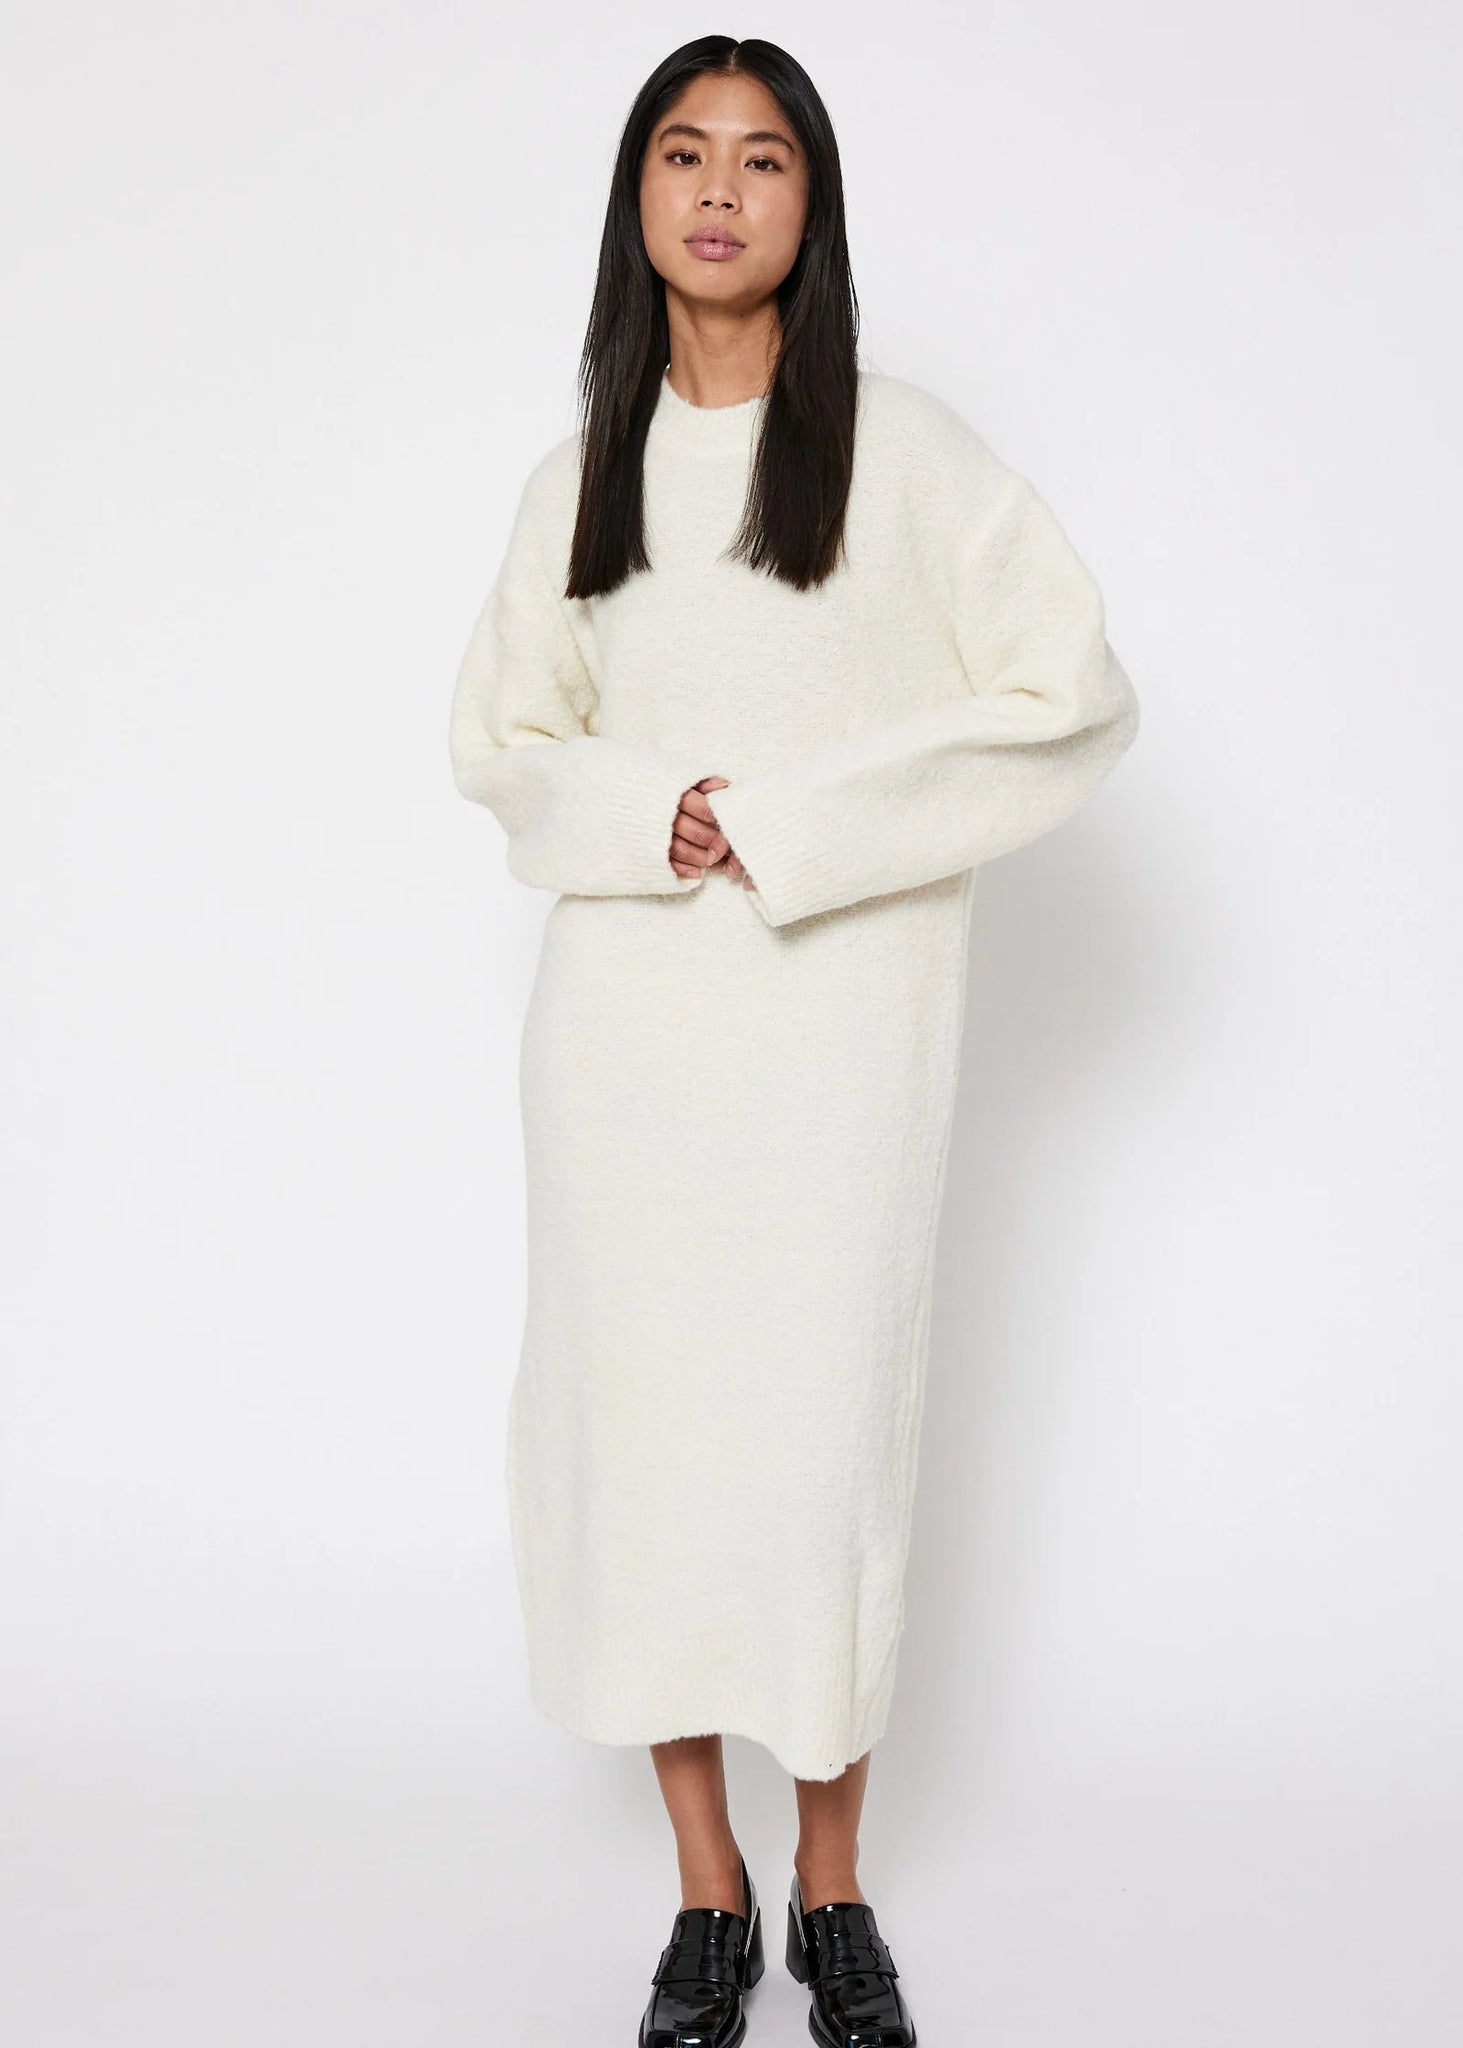 Vica knit dress in white